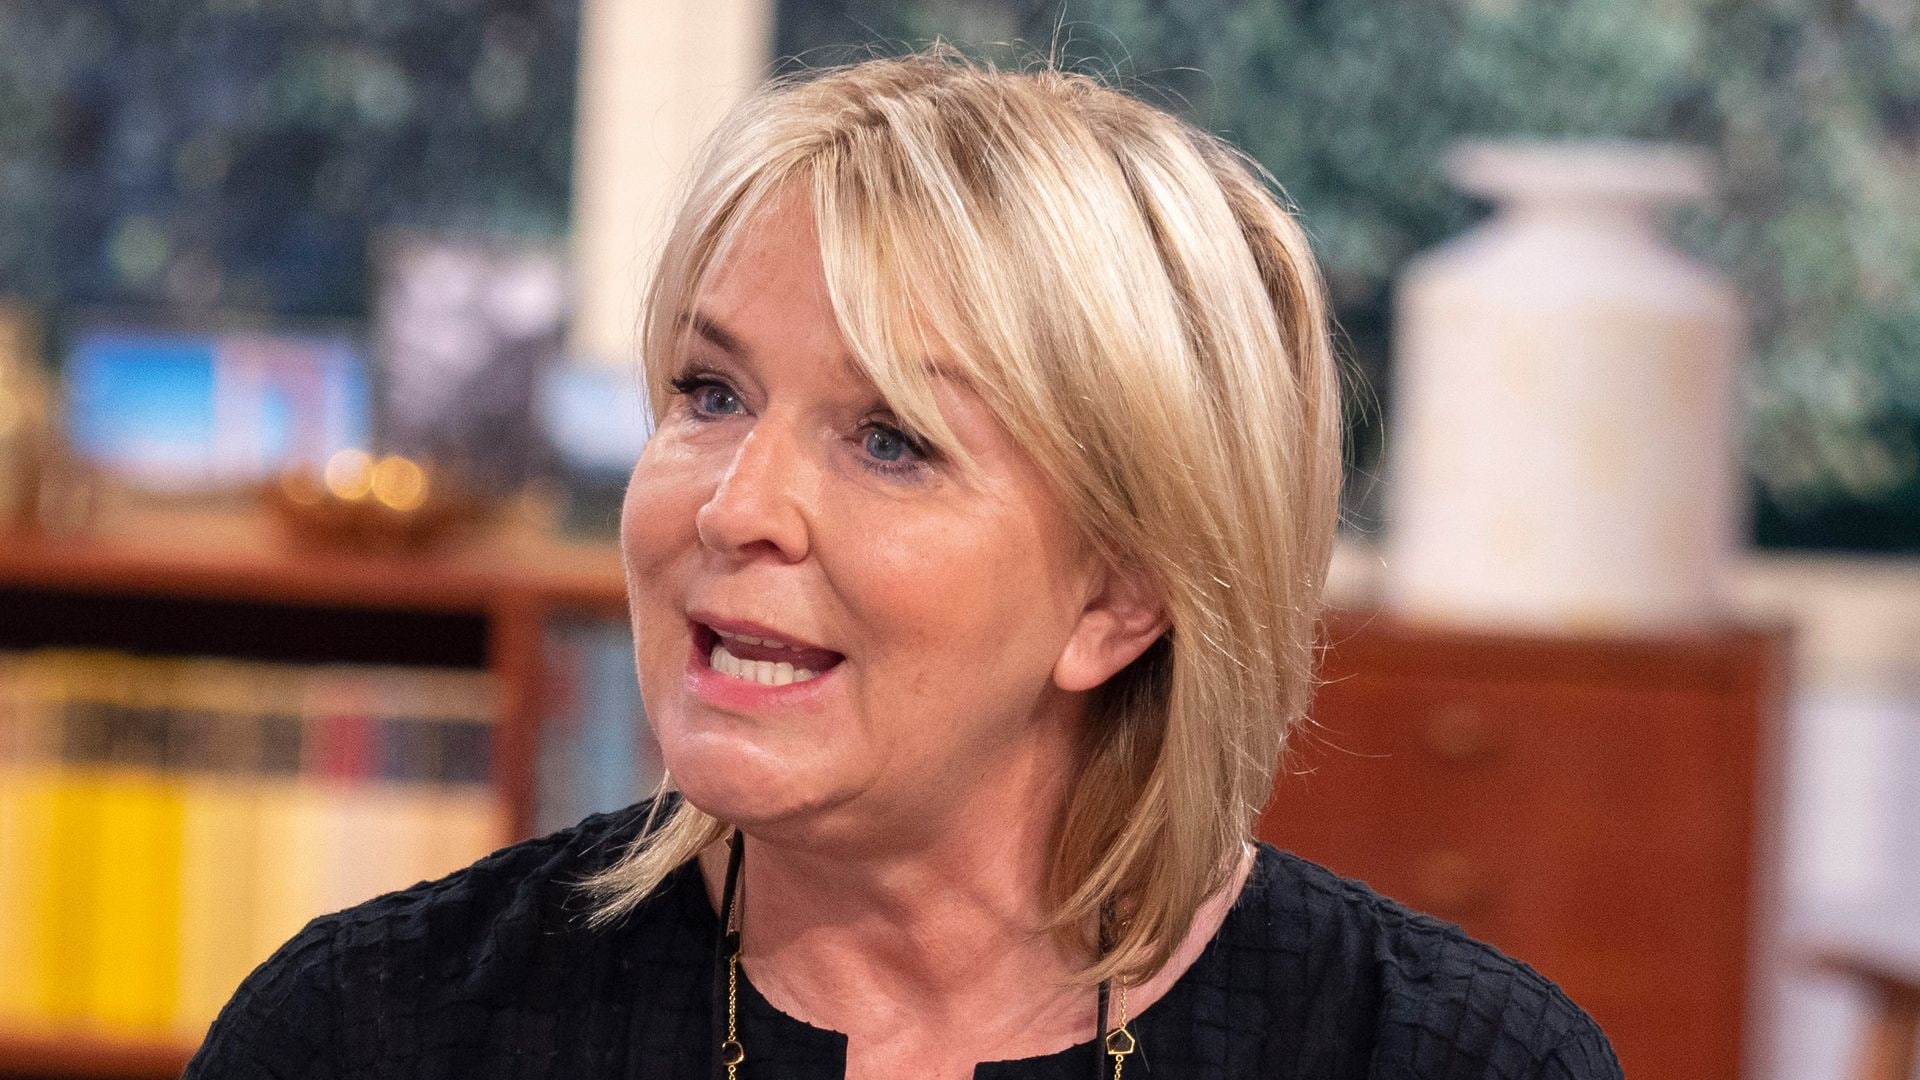 This Morning star Fern Britton sets the record straight in new video: 'Nothing to do with me'